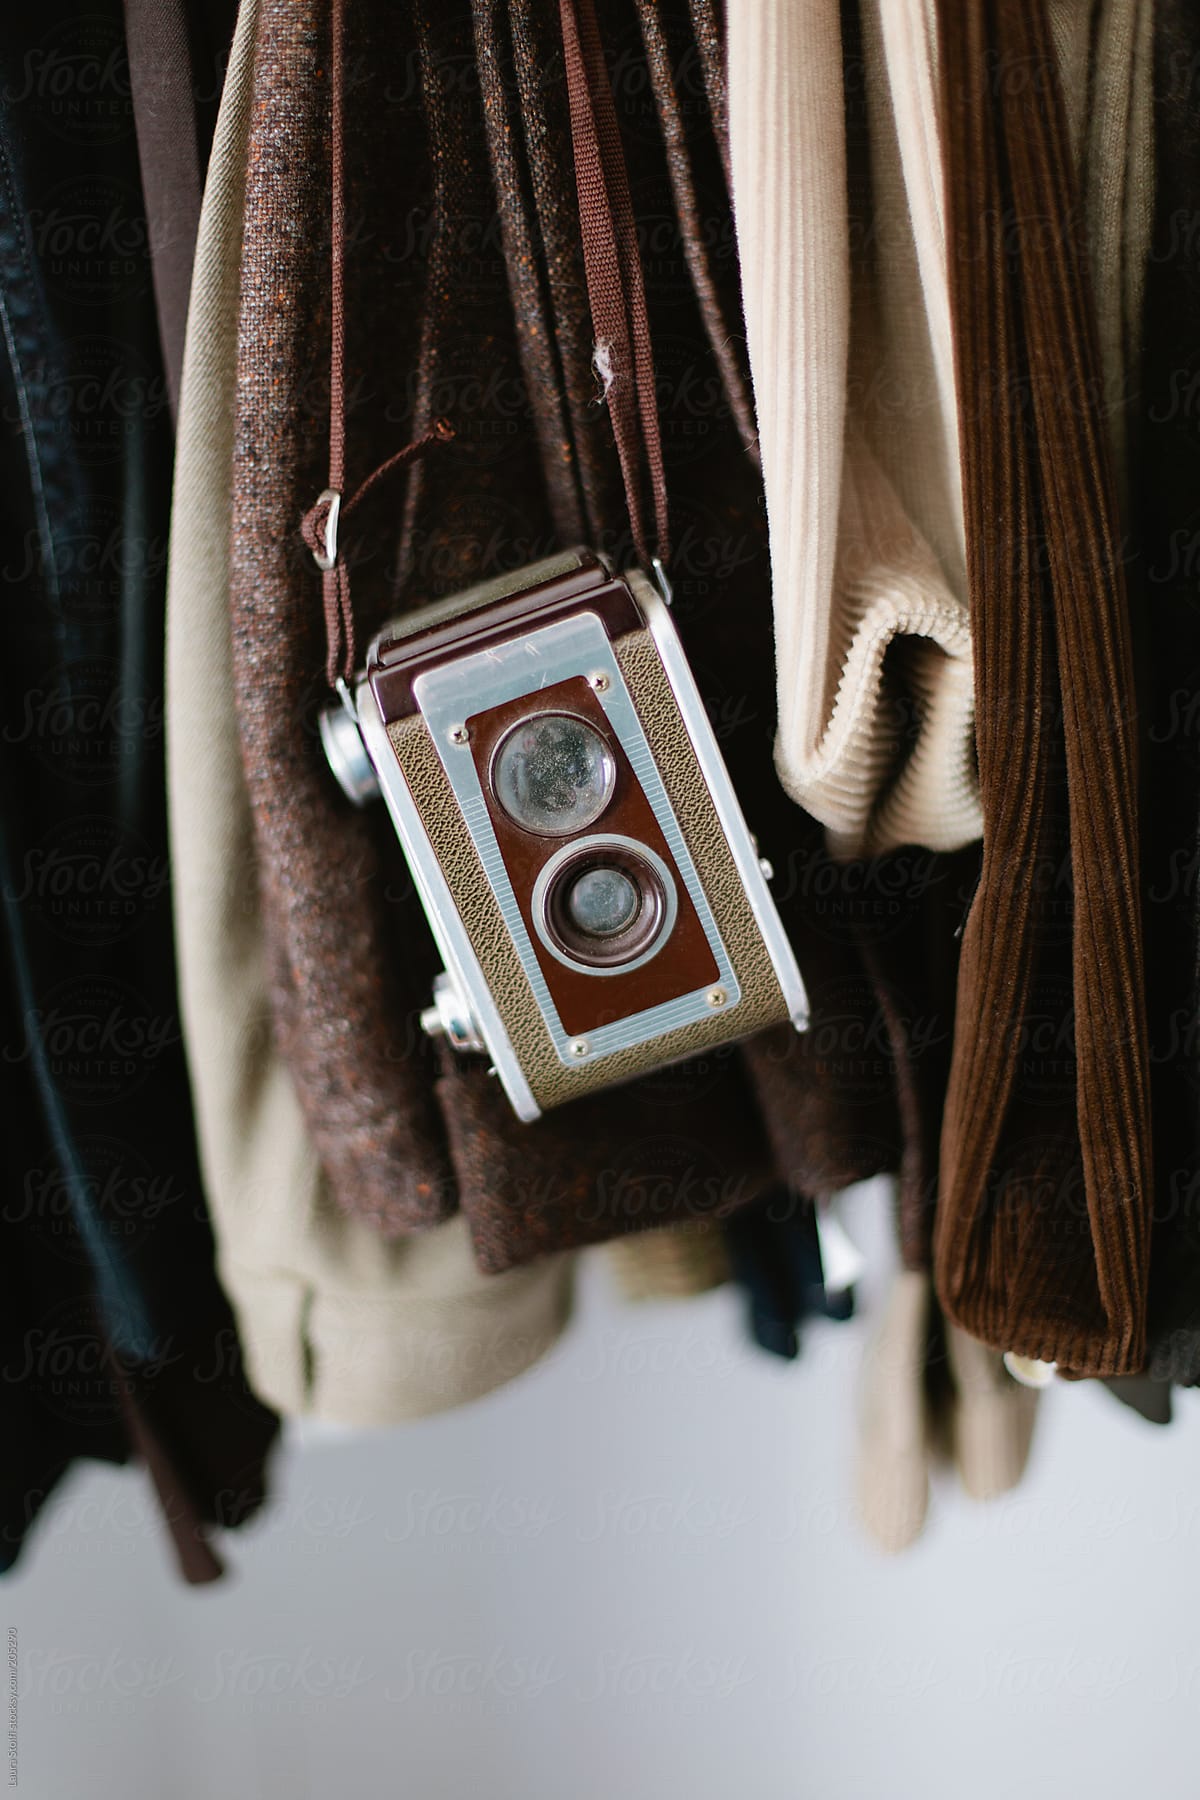 Old medium-format twin lens reflex camera hung amongst clothes in closet